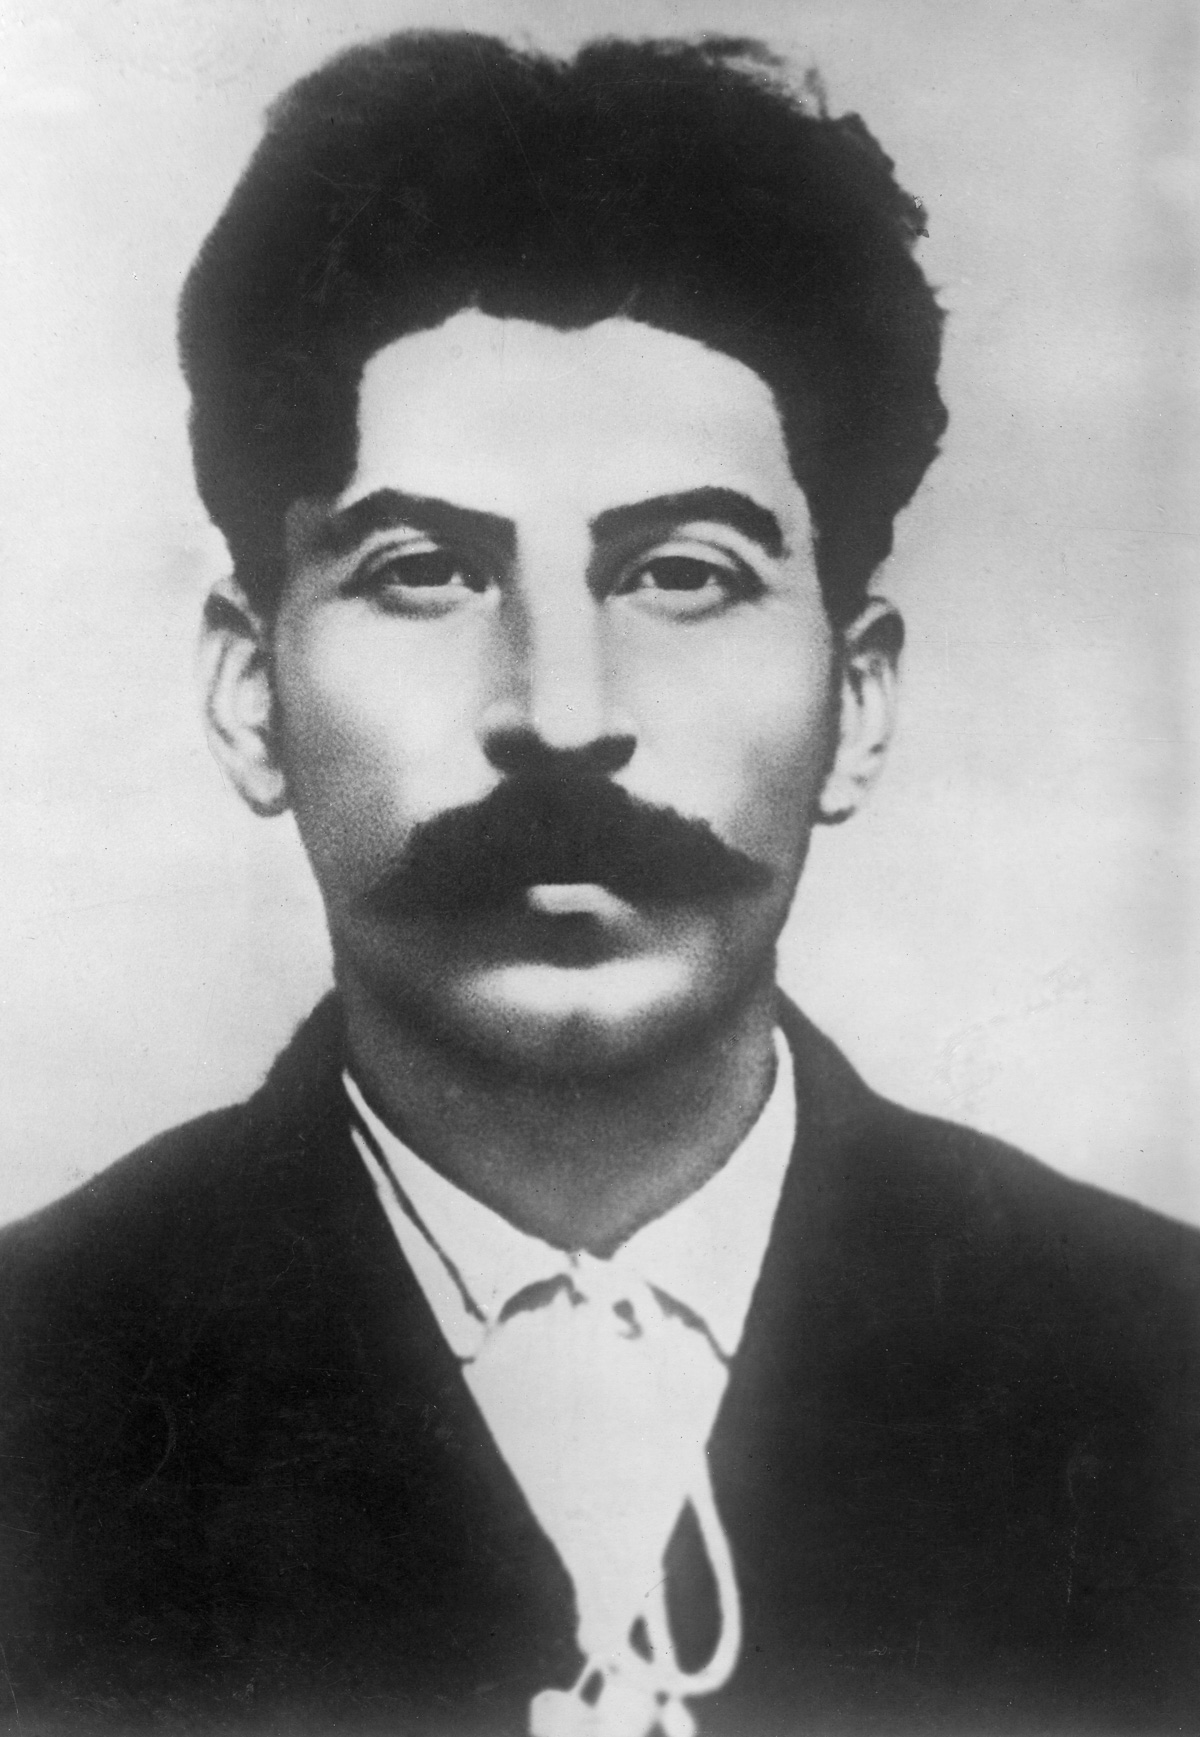 1911:  Headshot portrait of young Russian revolutionary and political leader Josef Stalin (1879 - 1953).  (Photo by Hulton Archive/Getty Images)